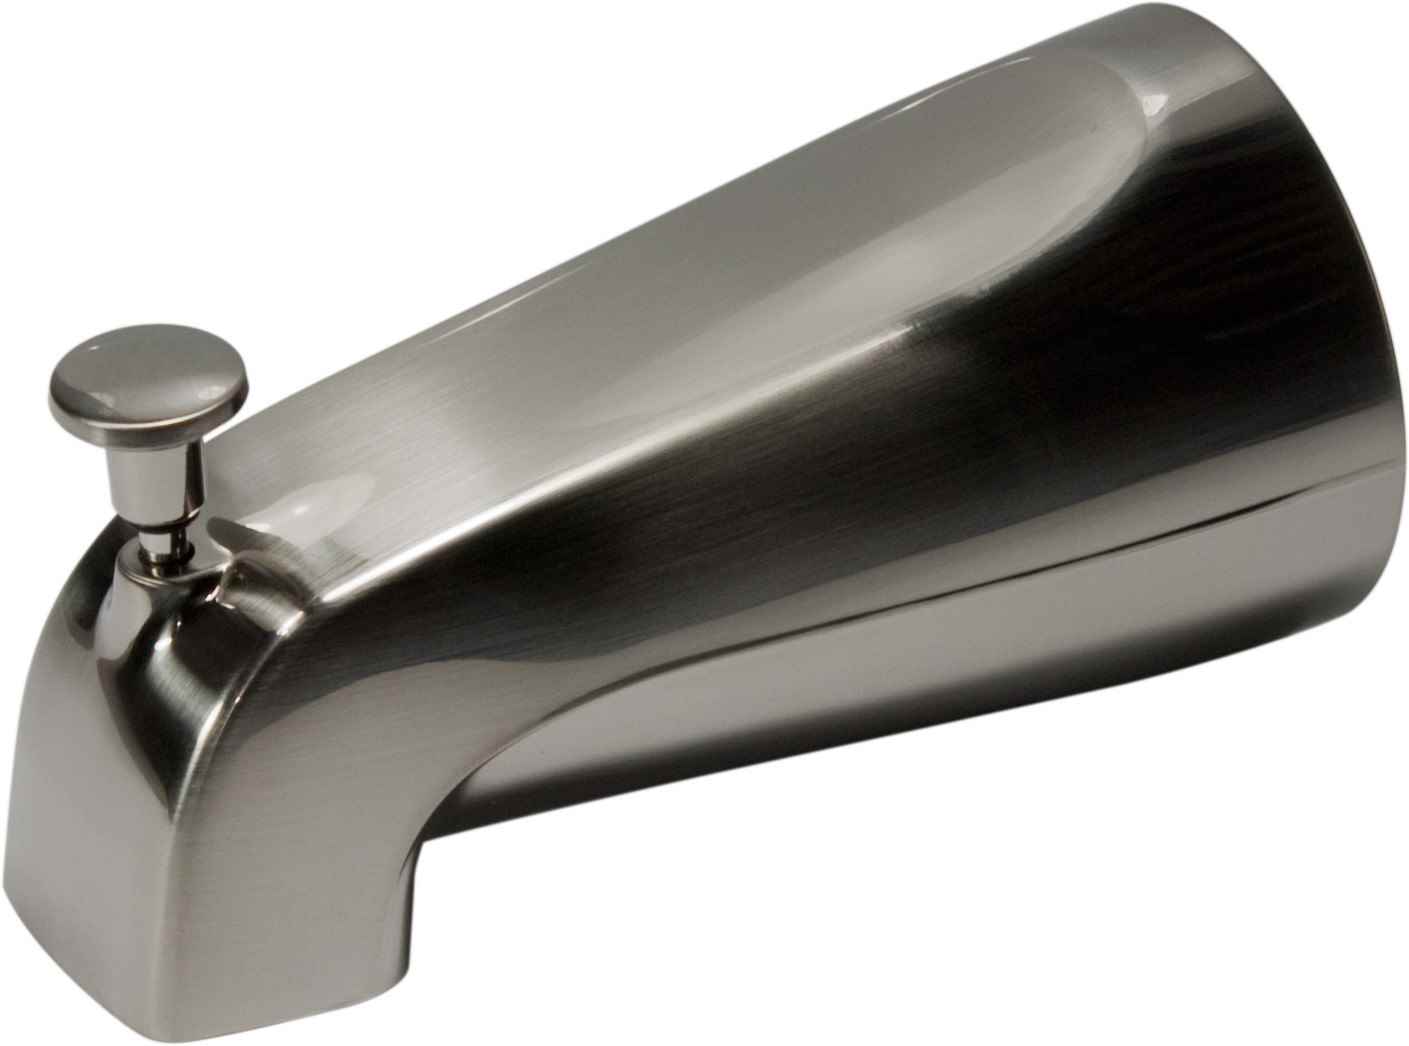 PP825-36N Bathtub Spout, 2-3/4 in L, 3/4 in Connection, IPS, Brushed Nickel, For: 1/2 in or 3/4 in Pipe